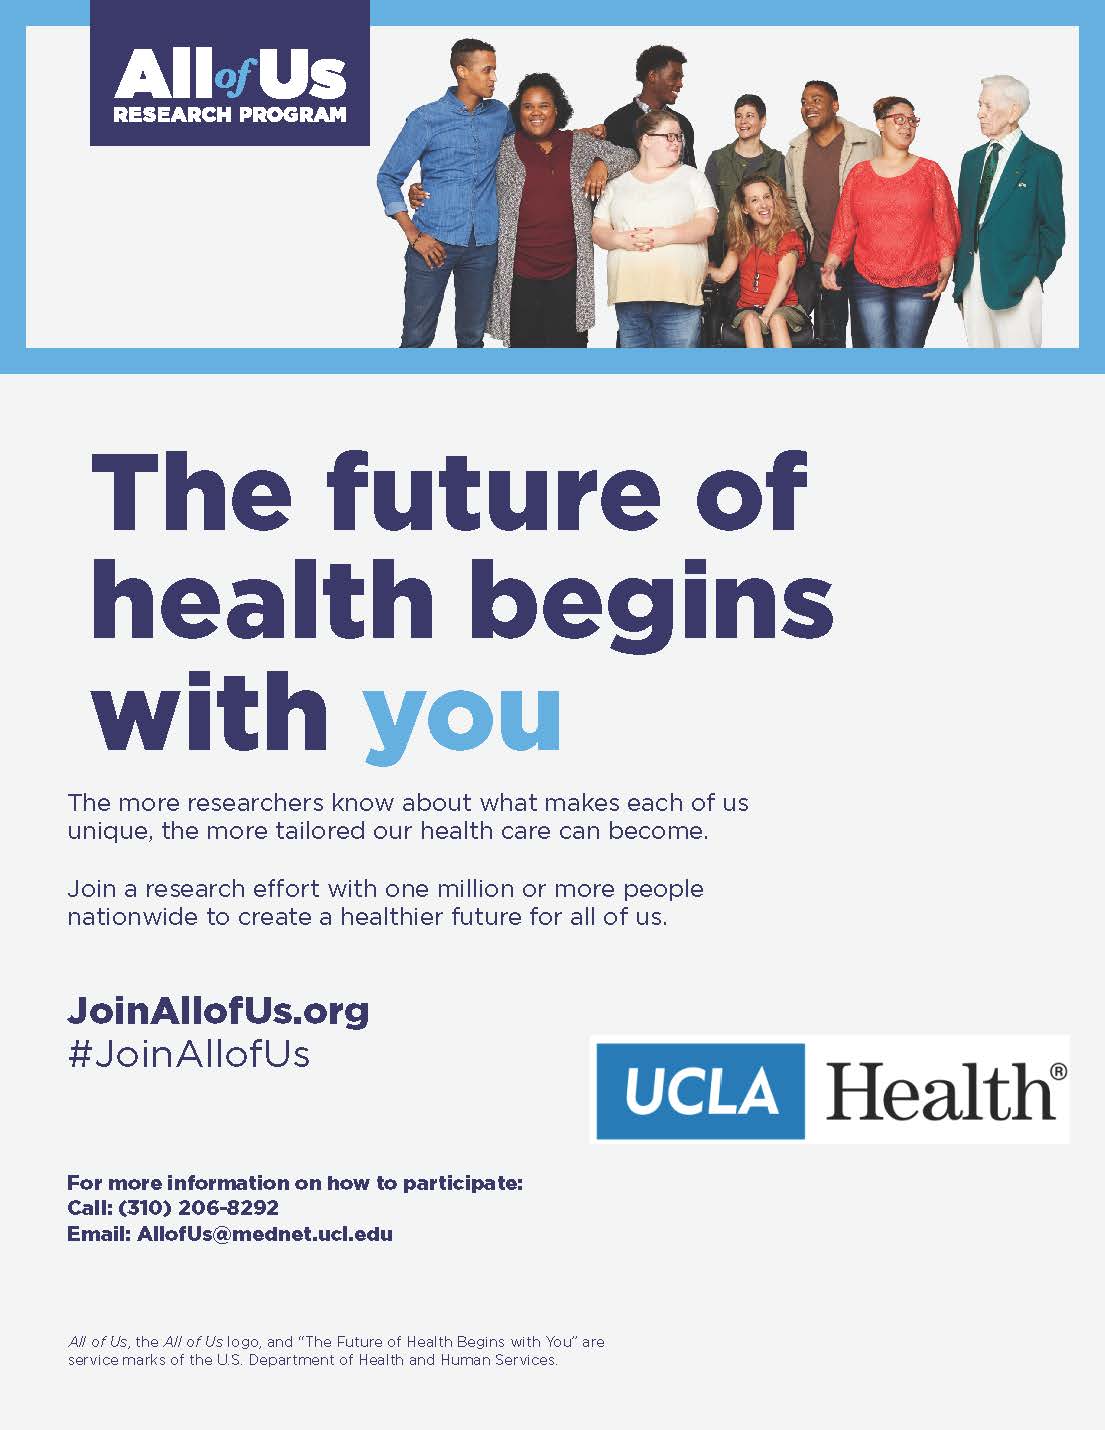 The Future of Health Begins With You